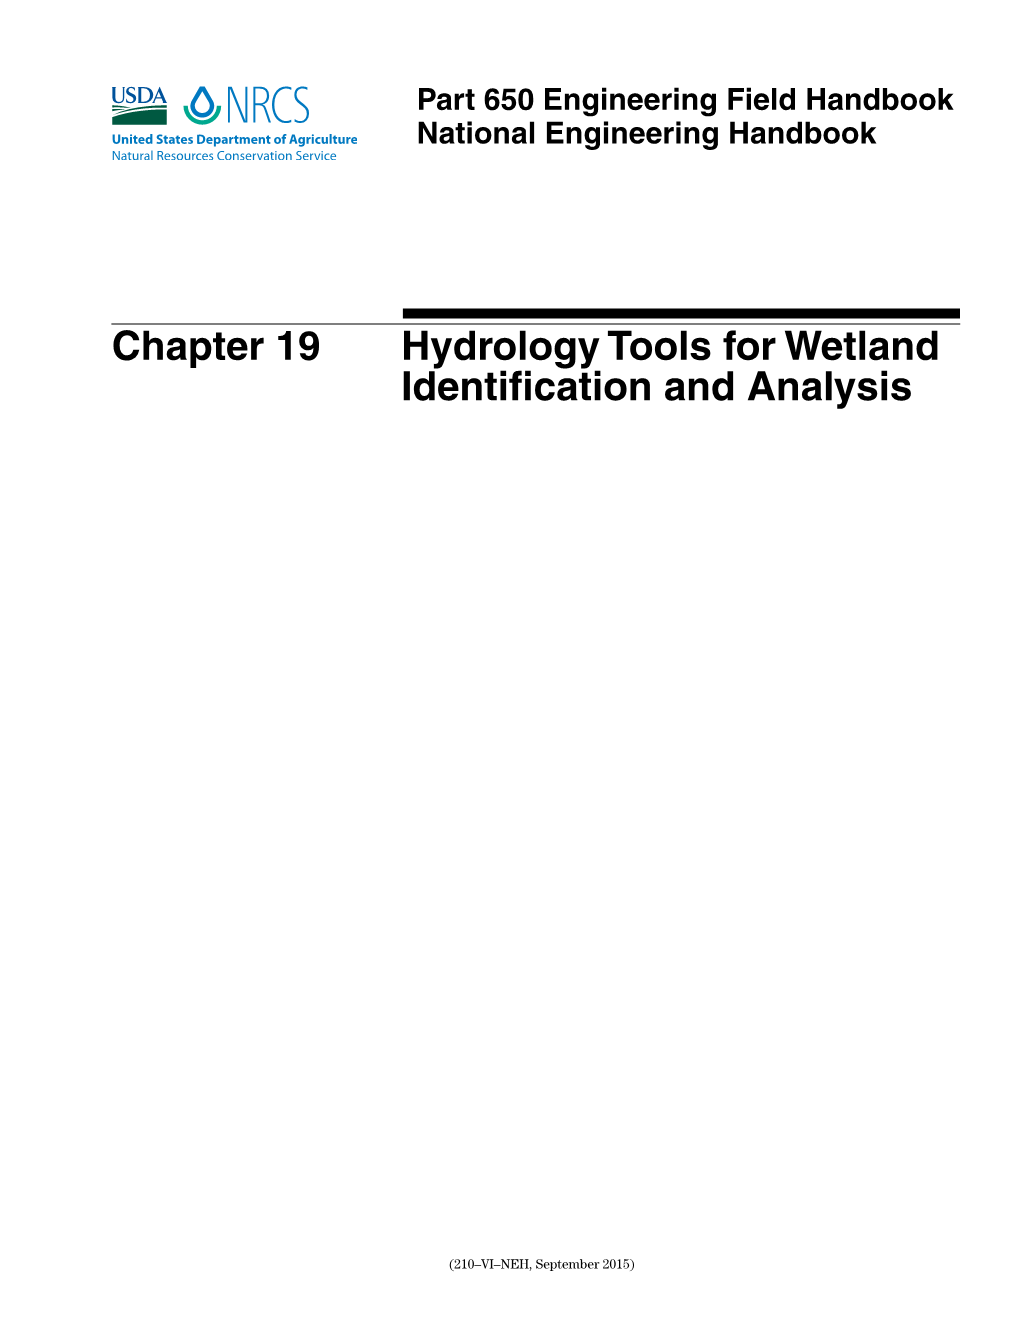 Chapter 19 Hydrology Tools for Wetland Identification and Analysis